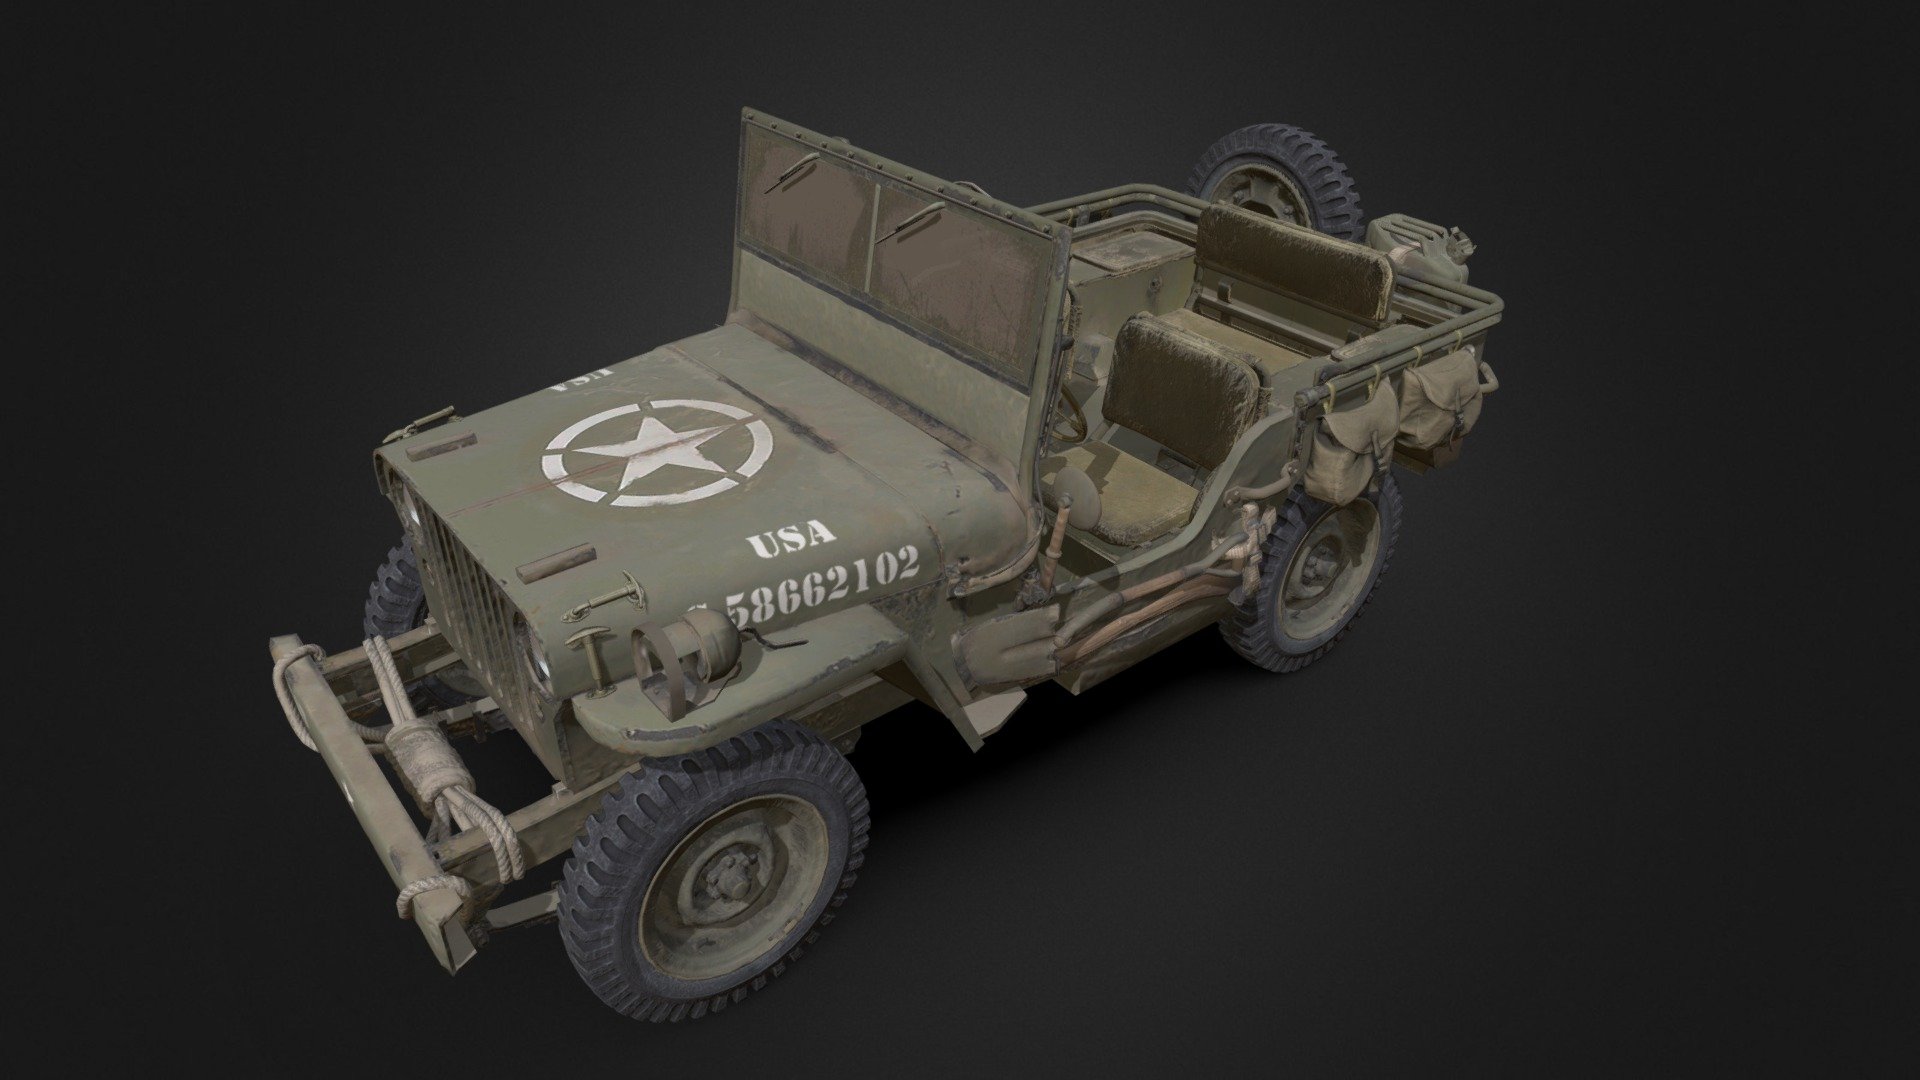 The Willys MB, better known by its nickname &ldquo;Jeep